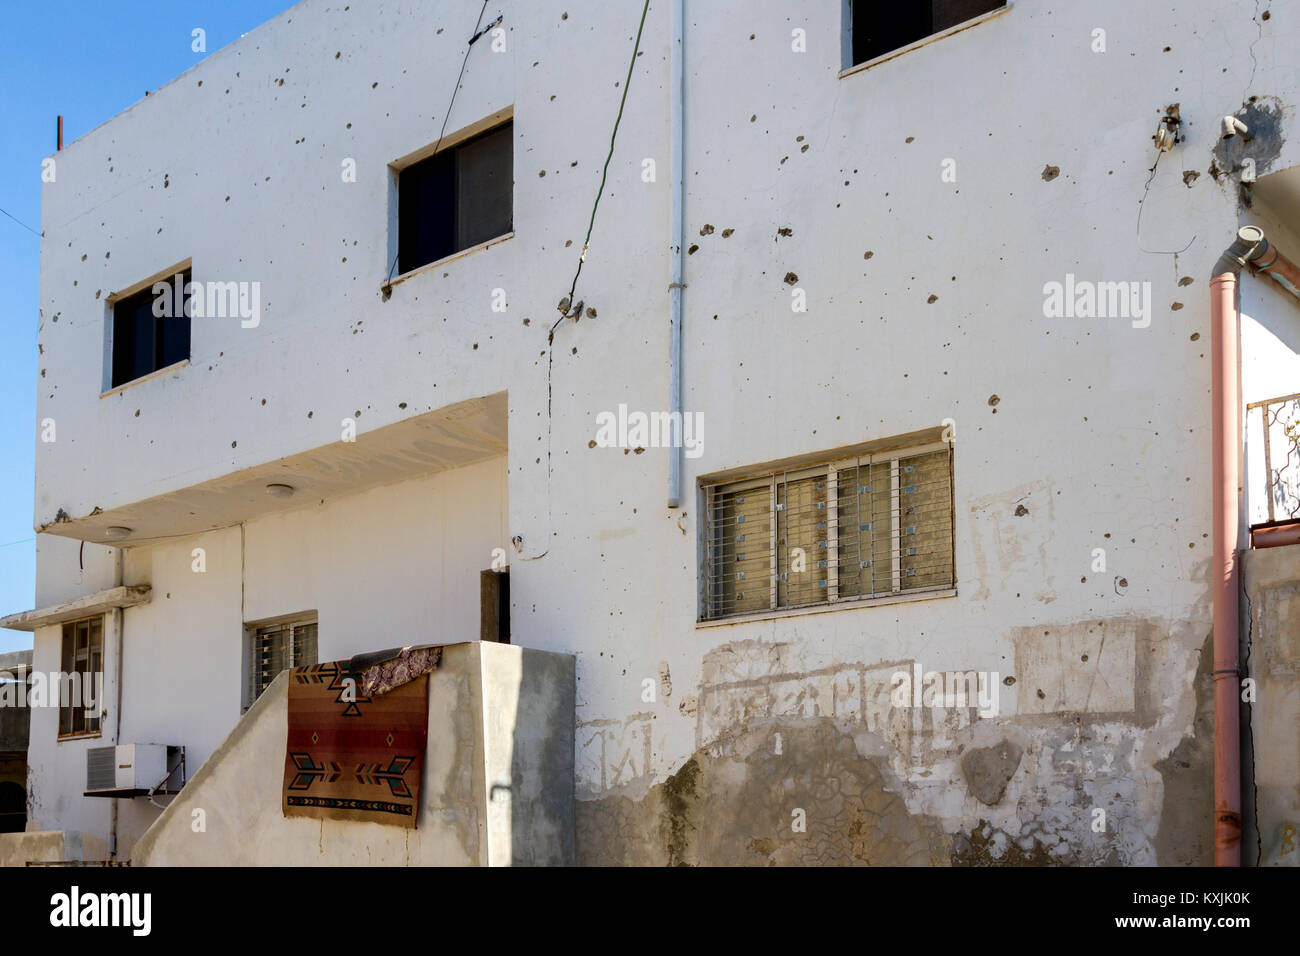 Jenin, Palestine,January 11, 2011: House wounded by gun shot and artillery during Palestinian intifada in Jenin refugee camp Stock Photo